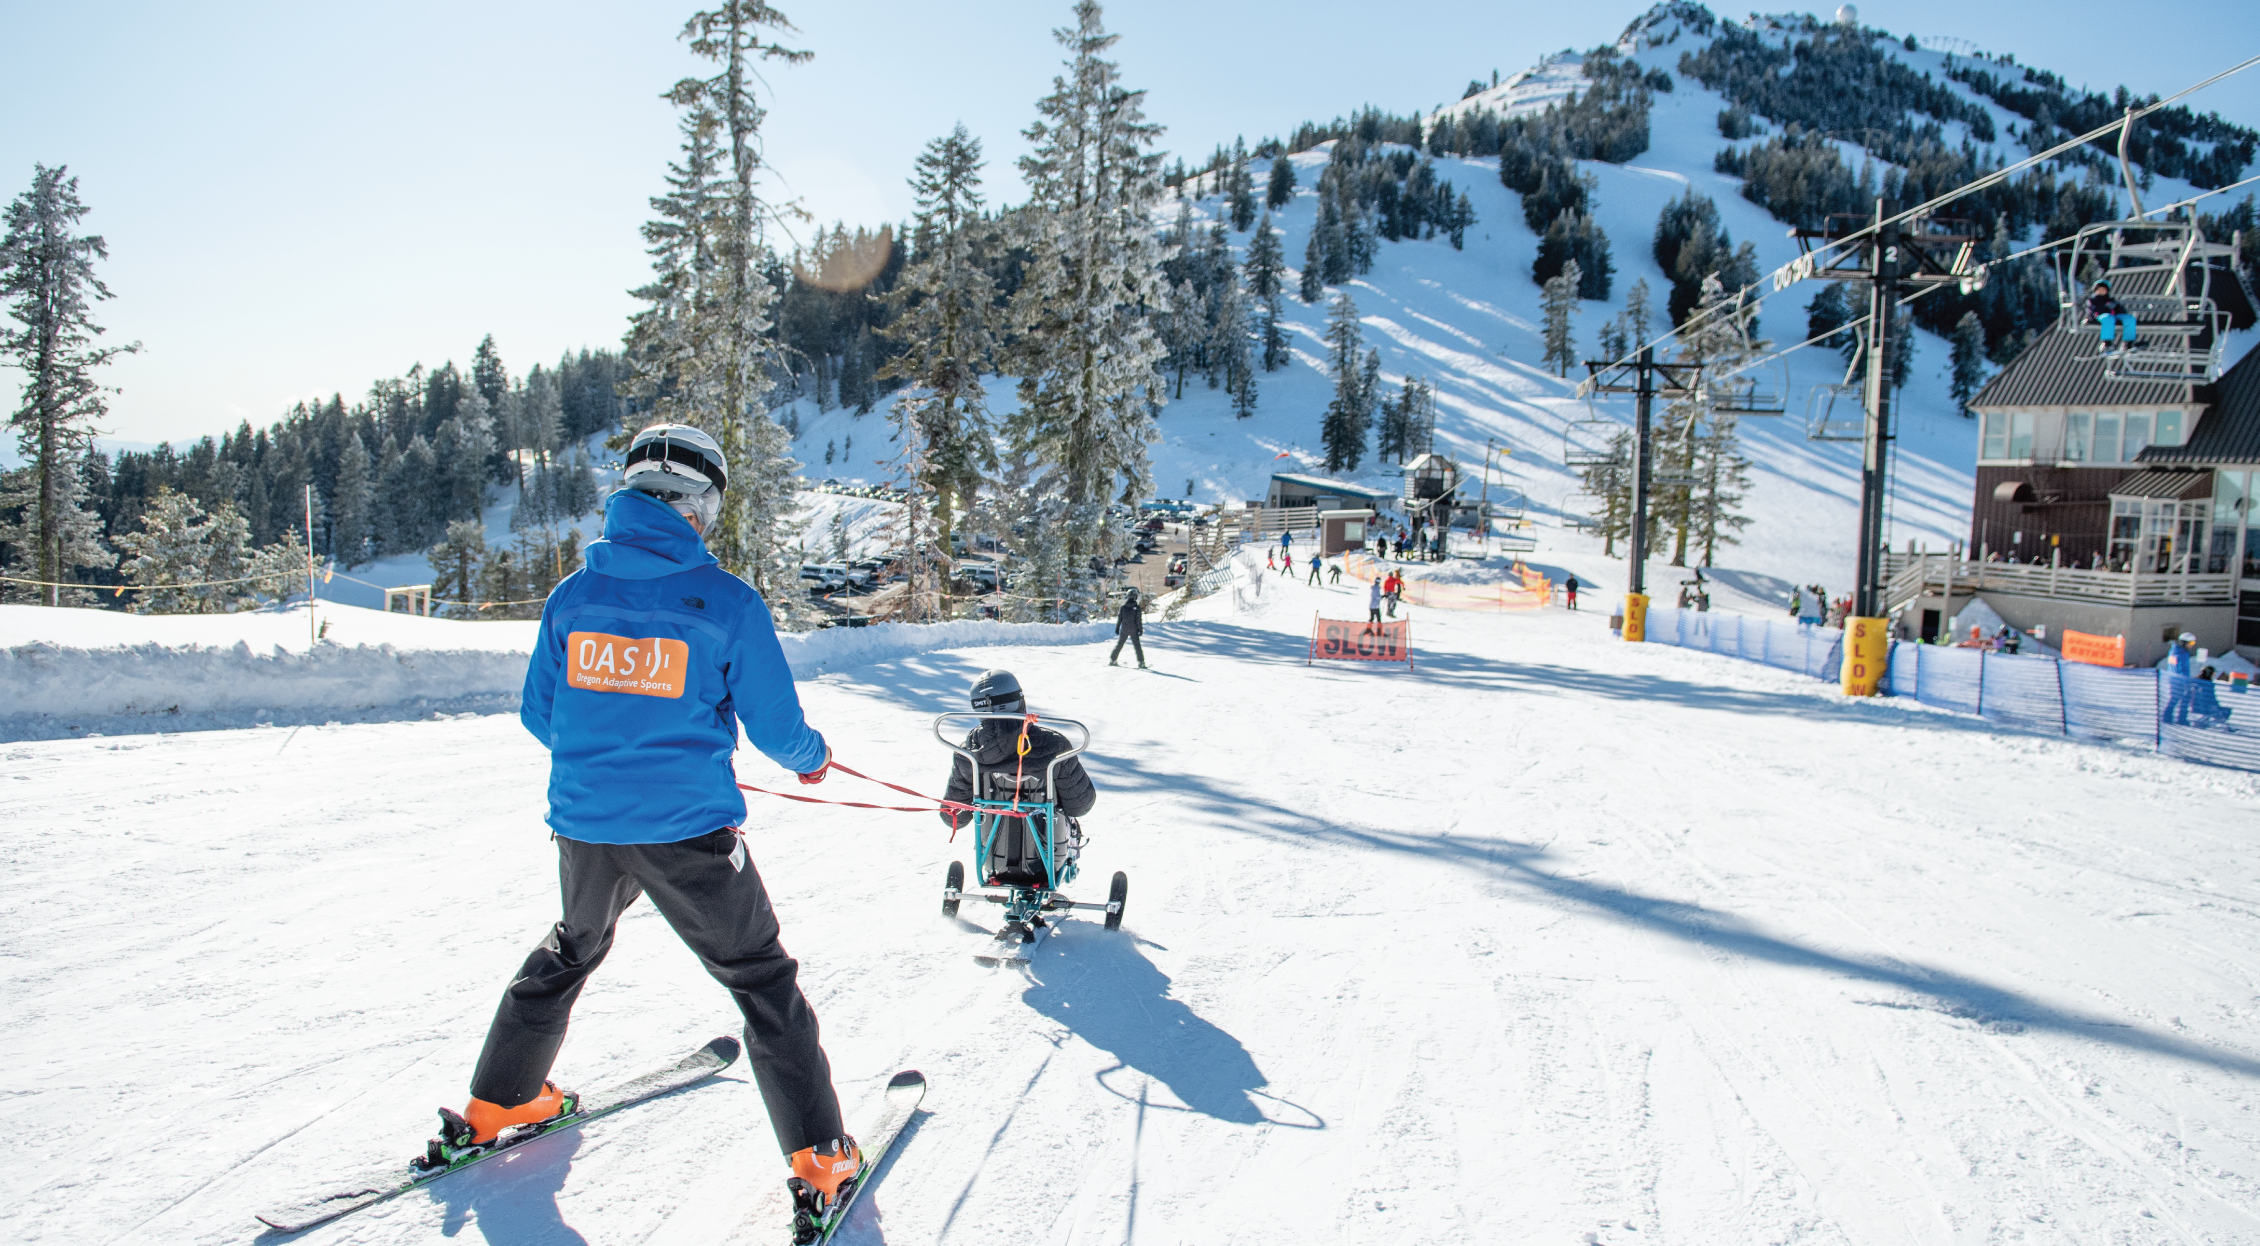 An instructor works with a sit skier on the slope in use of equipment at Mt. Ashland